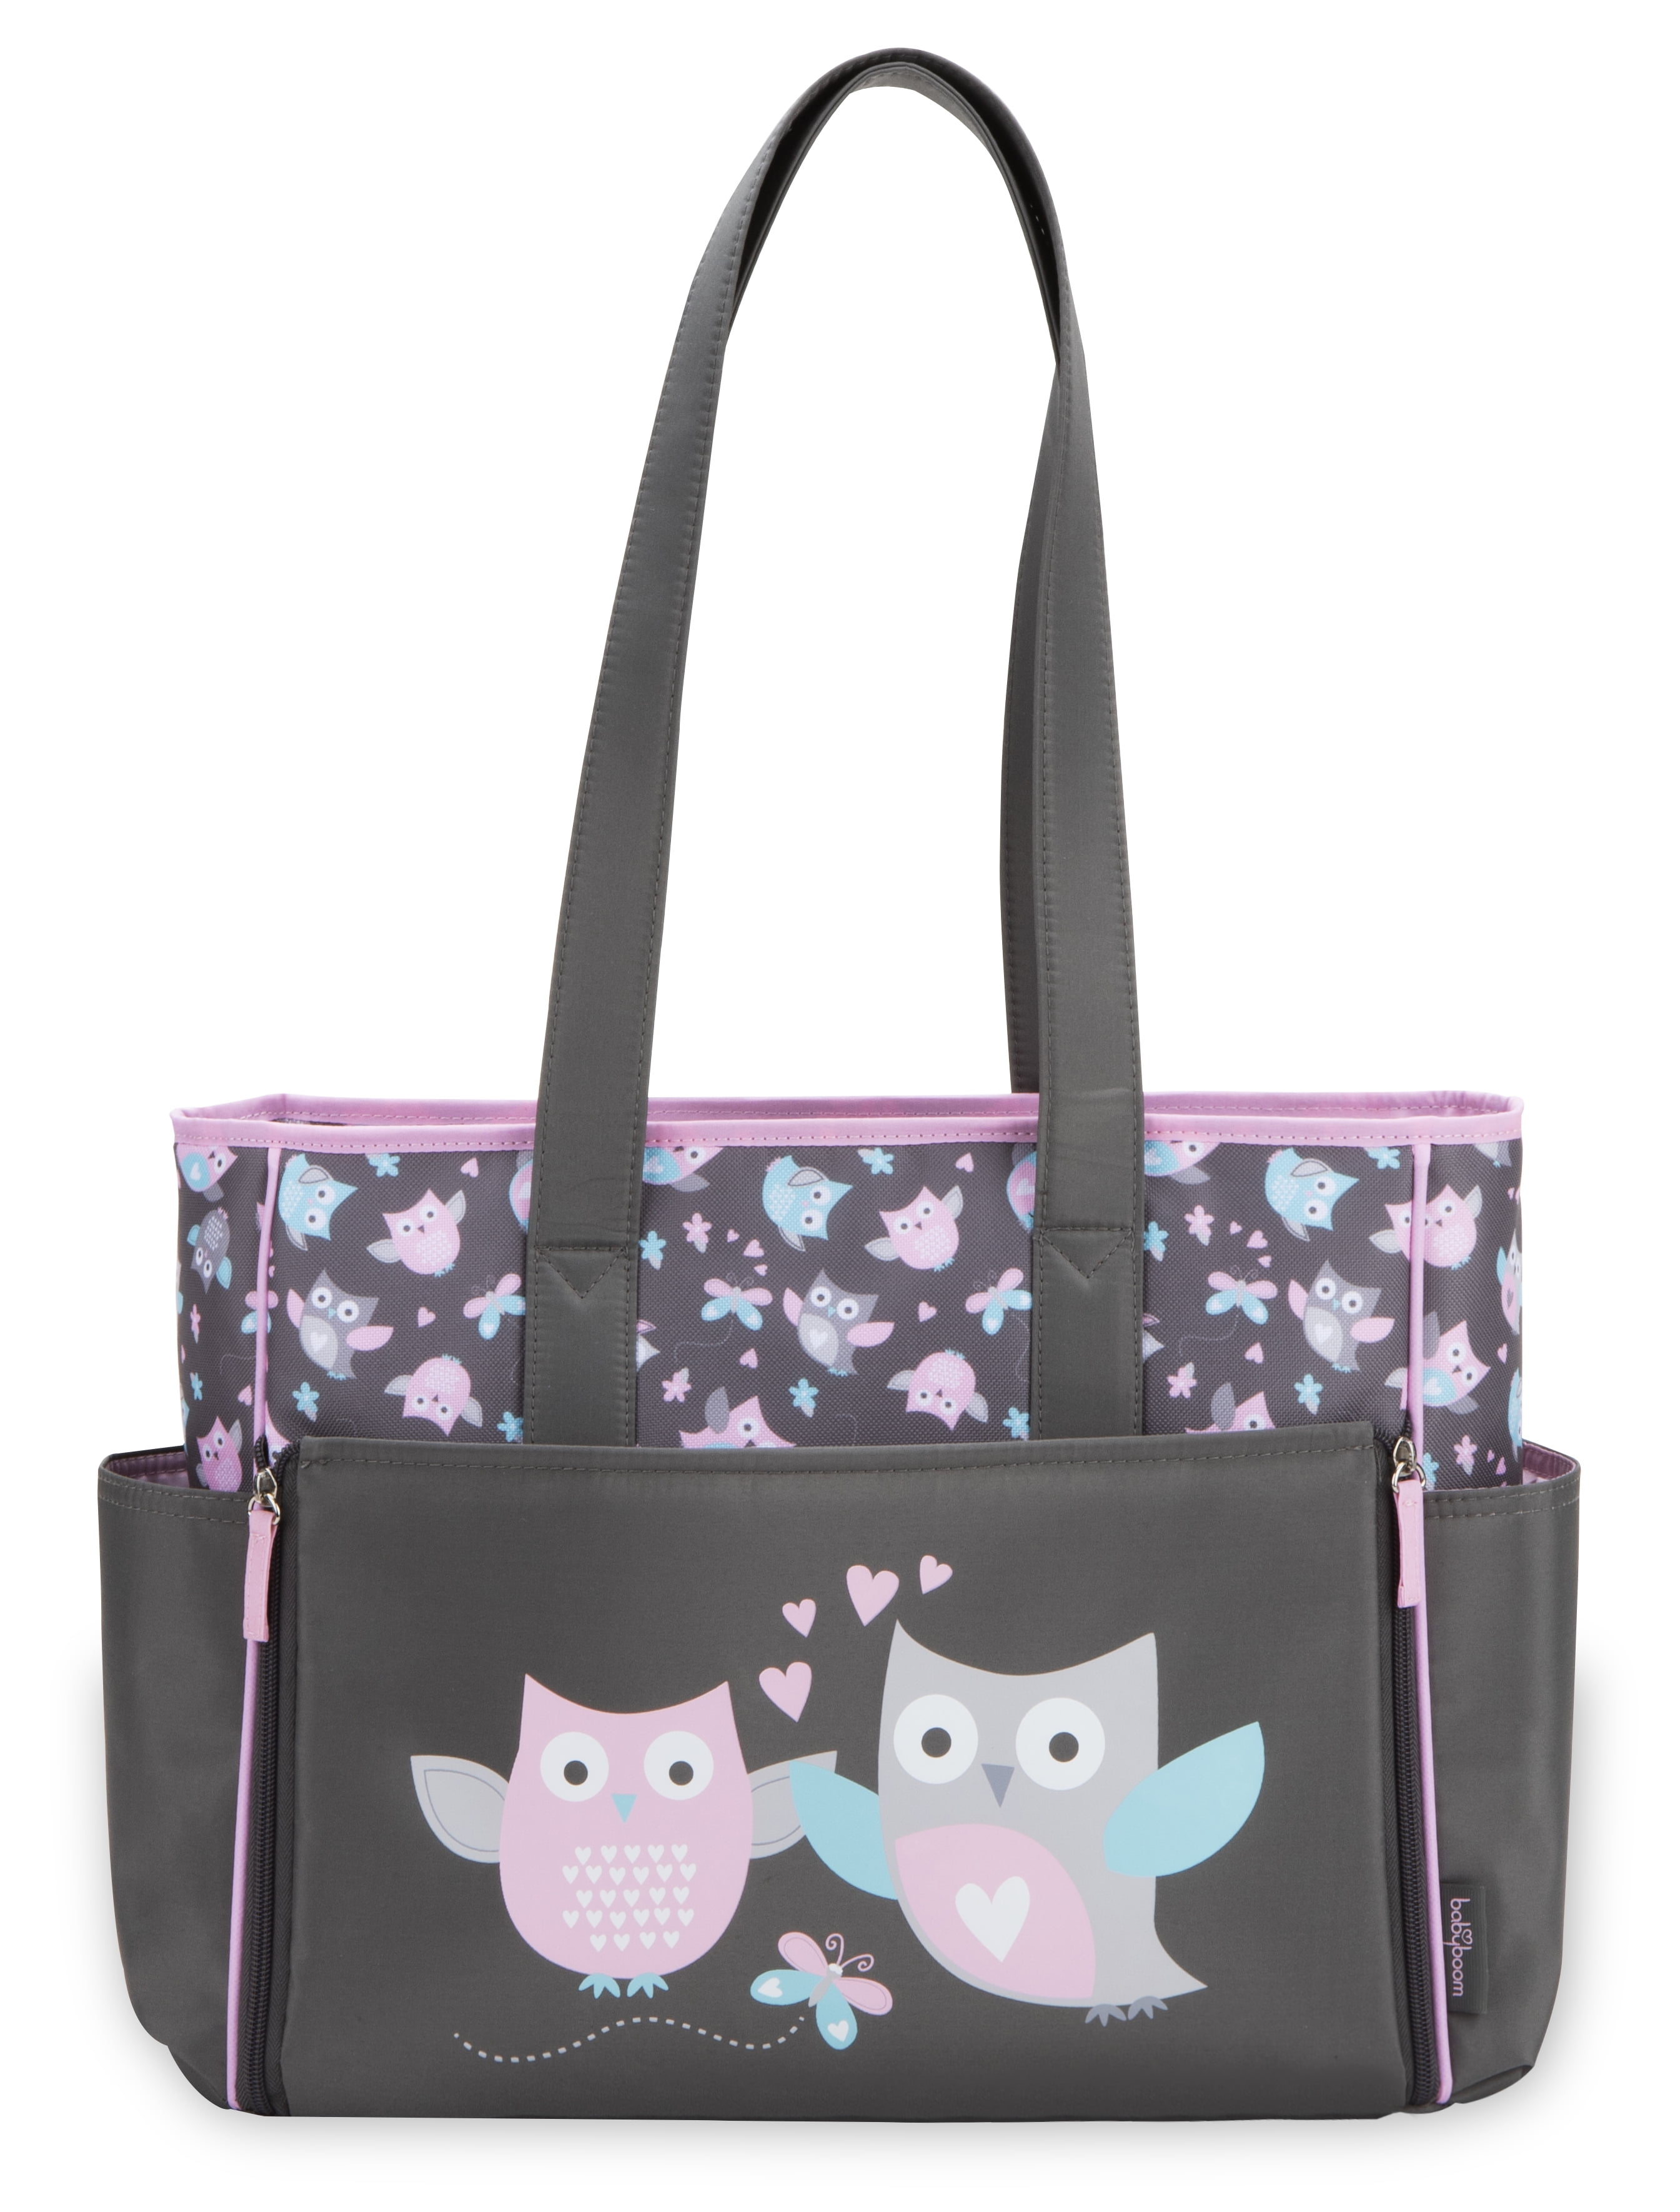 10 Pieces Diaper Bag Set Owl Pink Baby Girl Shower Newborn Tote Free Shipping 